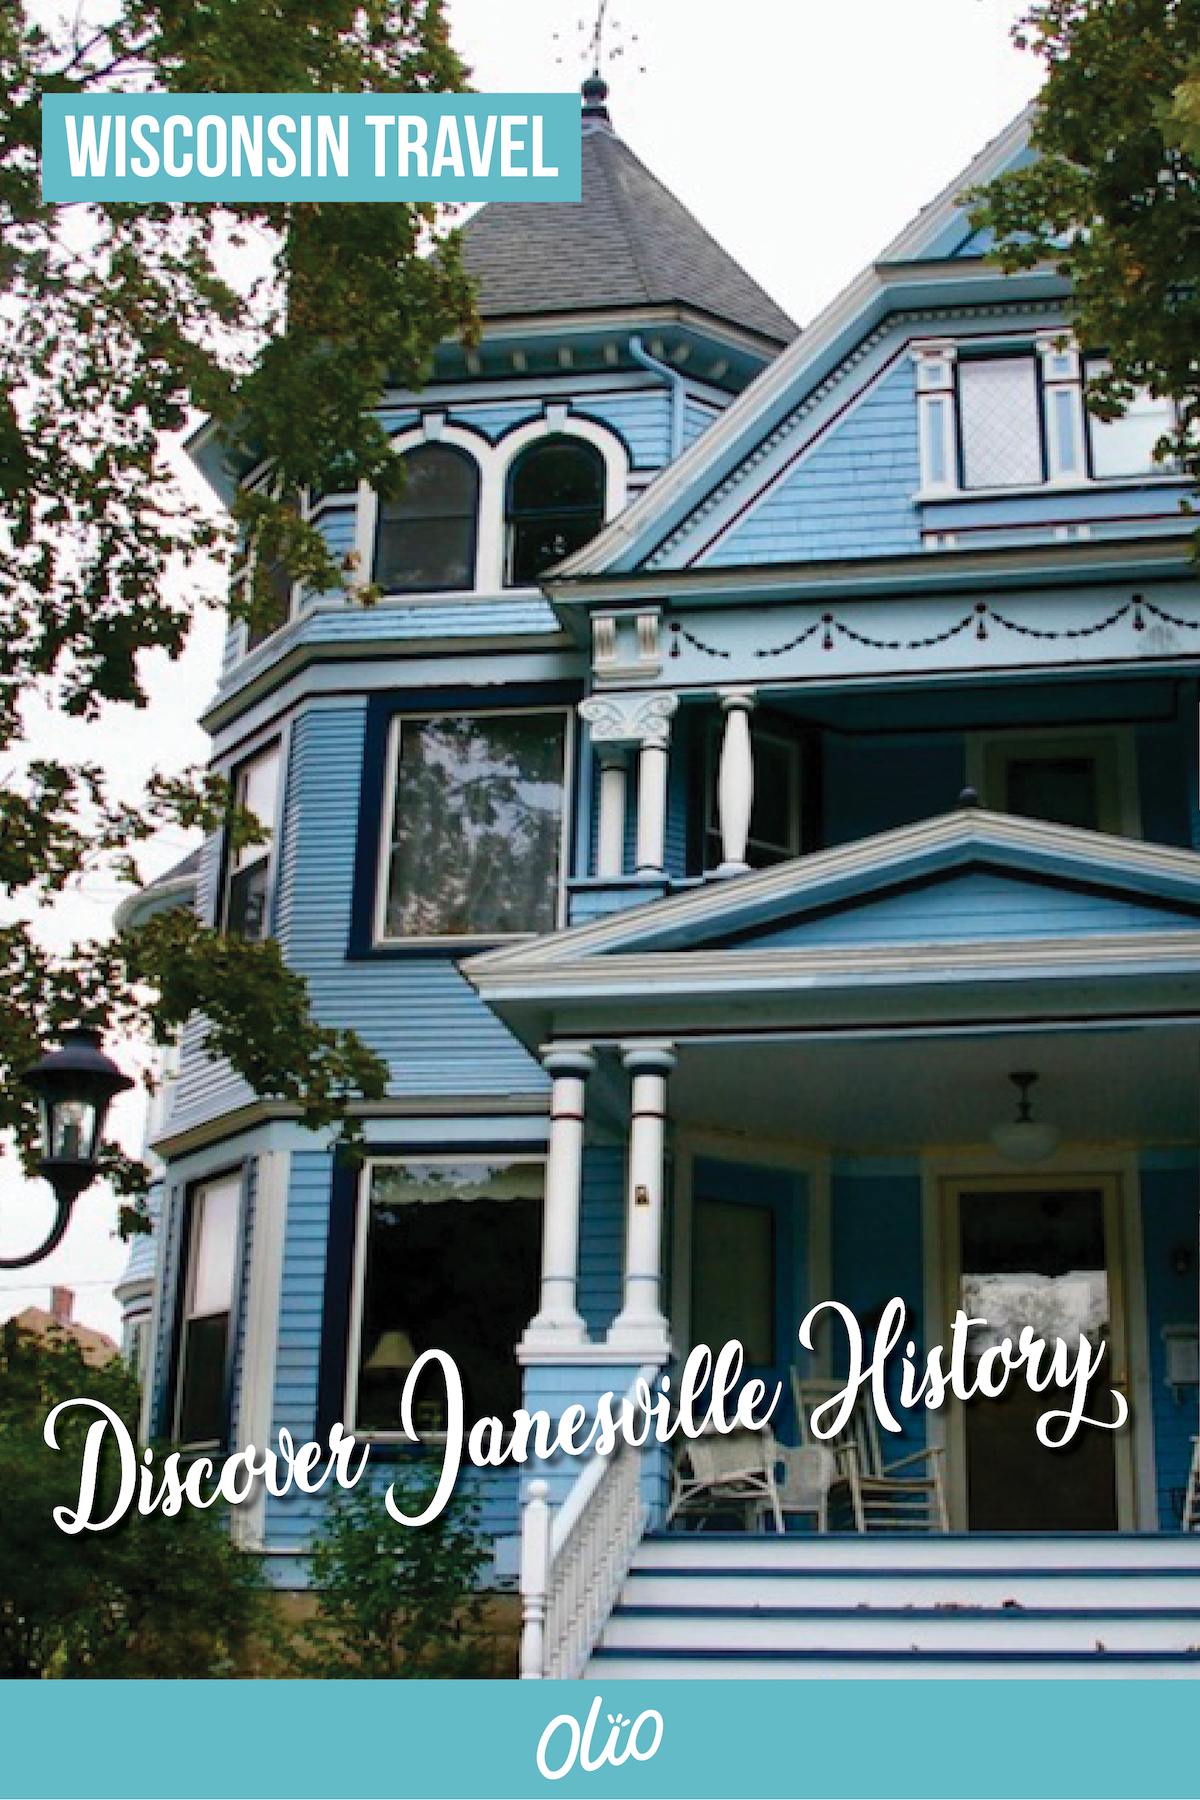 Do you love local history? Discover three ways to experience the unique history of Janesville, Wisconsin the next time you're in the area. #Wisconsin #Janesville #history